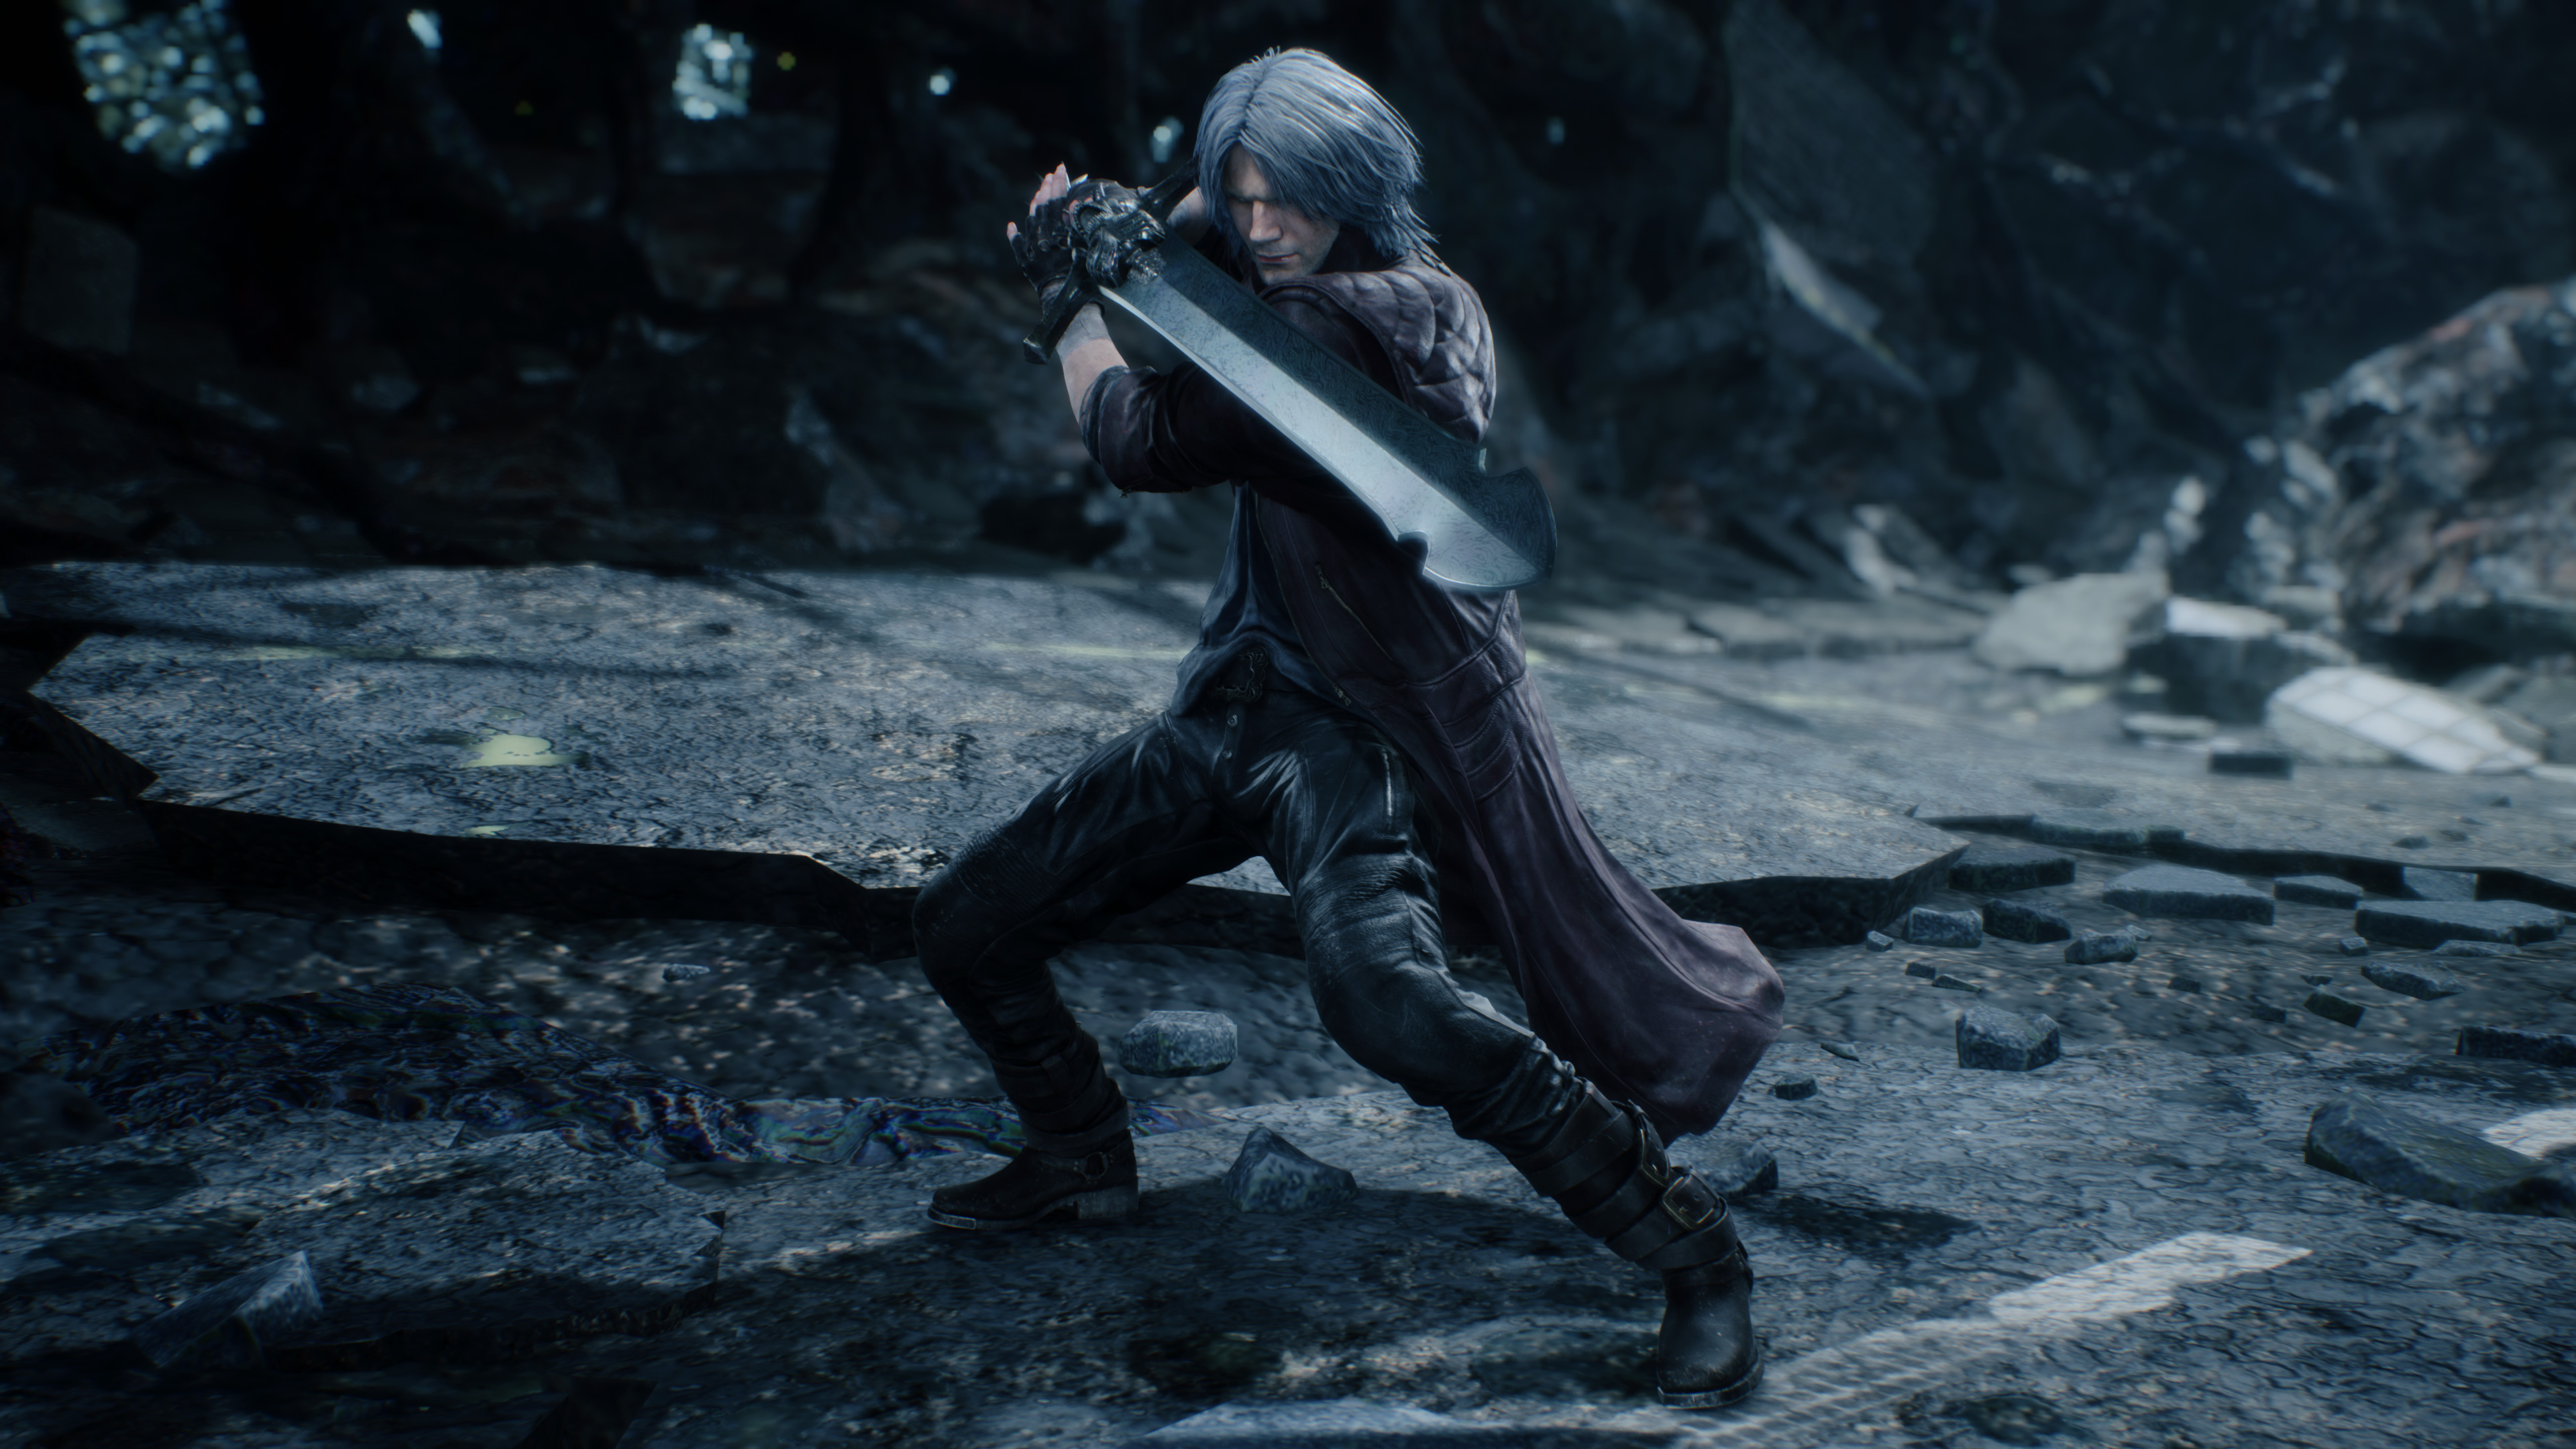 Devil May Cry 5 Update: Hideaki Itsuno reveals Nico will be added to  support Nero